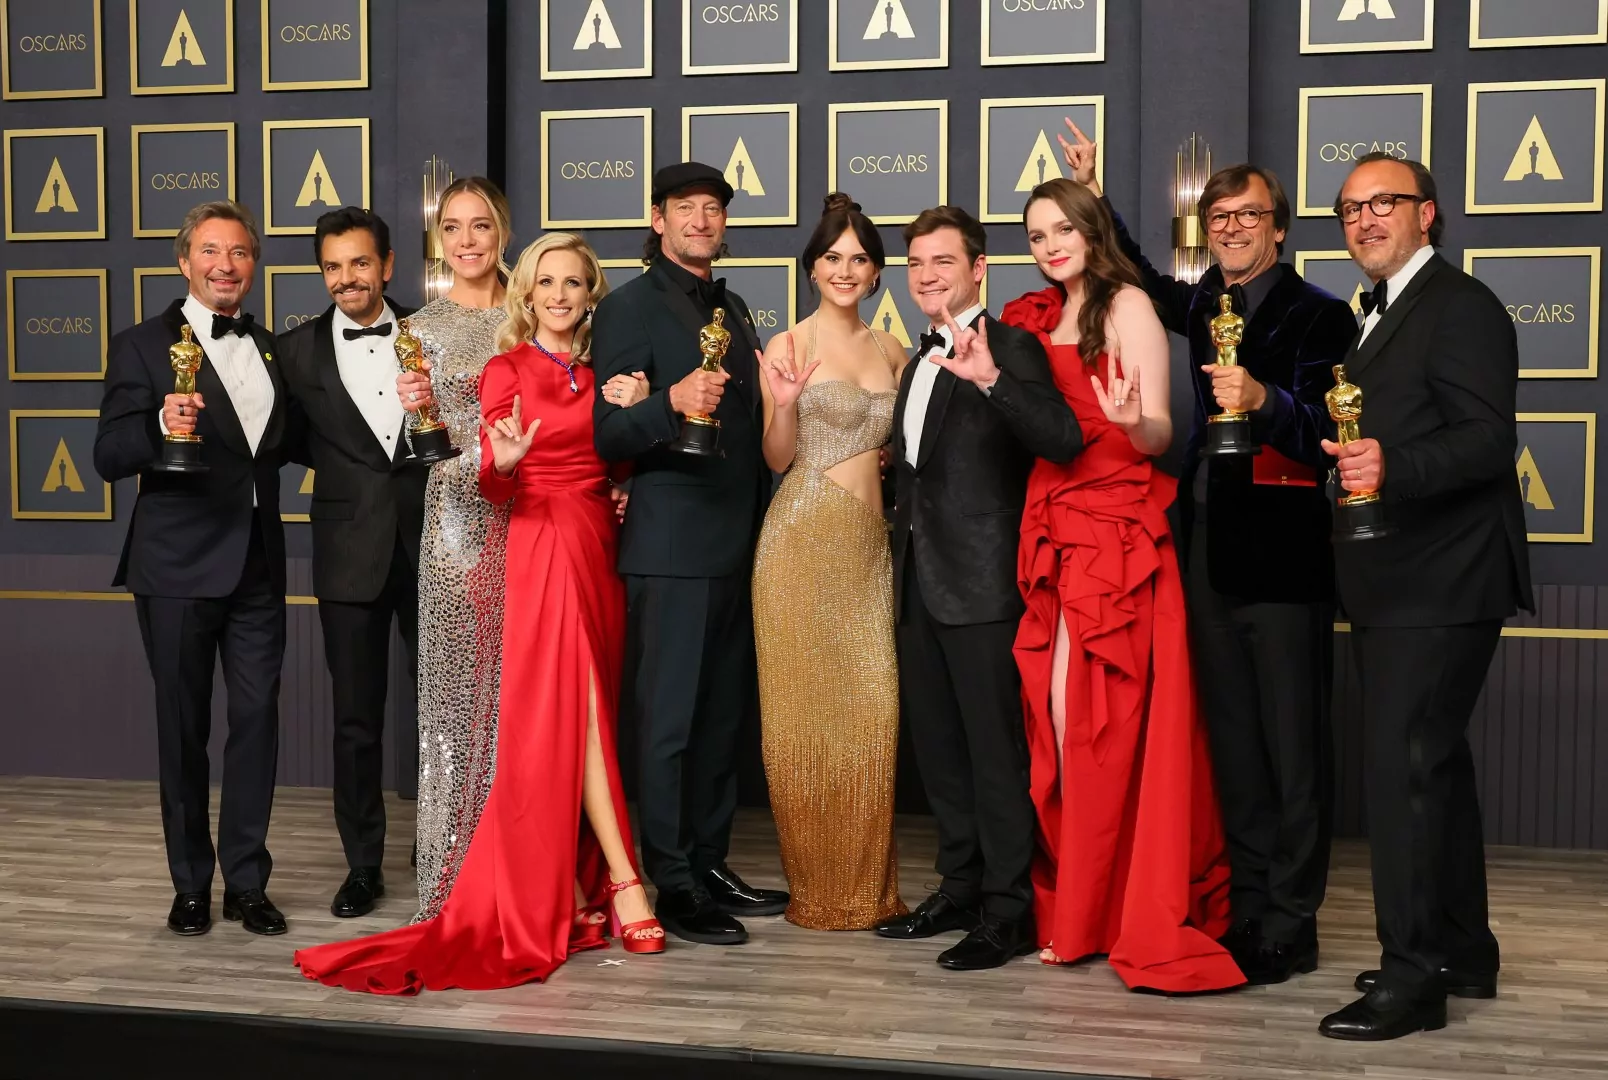 HOLLYWOOD, CALIFORNIA - MARCH 27: Emilia Jones, Daniel Durant, Sian Heder, Marlee Matlin, Eugenio Derbez, Fabrice Gianfermi, Patrick Wachsberger, Justin Maurer, Troy Kotsur, Amy Forsyth, and Philippe Rousselet, winners of the Best Picture award for ‘CODA’ pose in the press room during the 94th Annual Academy Awards at Hollywood and Highland on March 27, 2022 in Hollywood, California. (Photo by Mike Coppola/Getty Images)